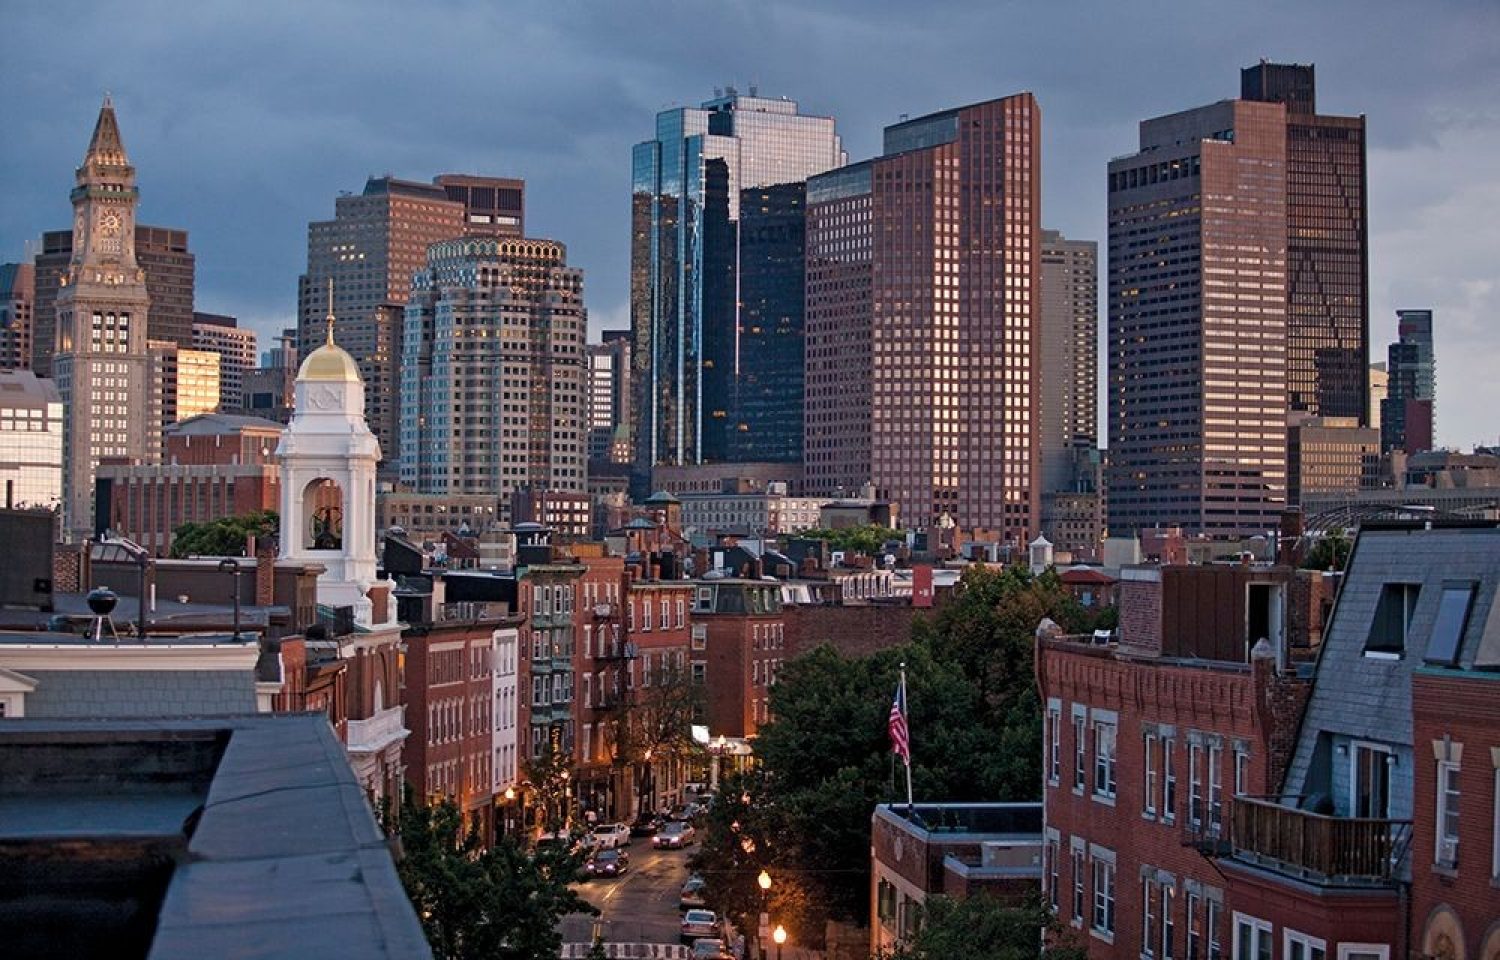 Downtown Boston's skyline, as viewed from the North End.